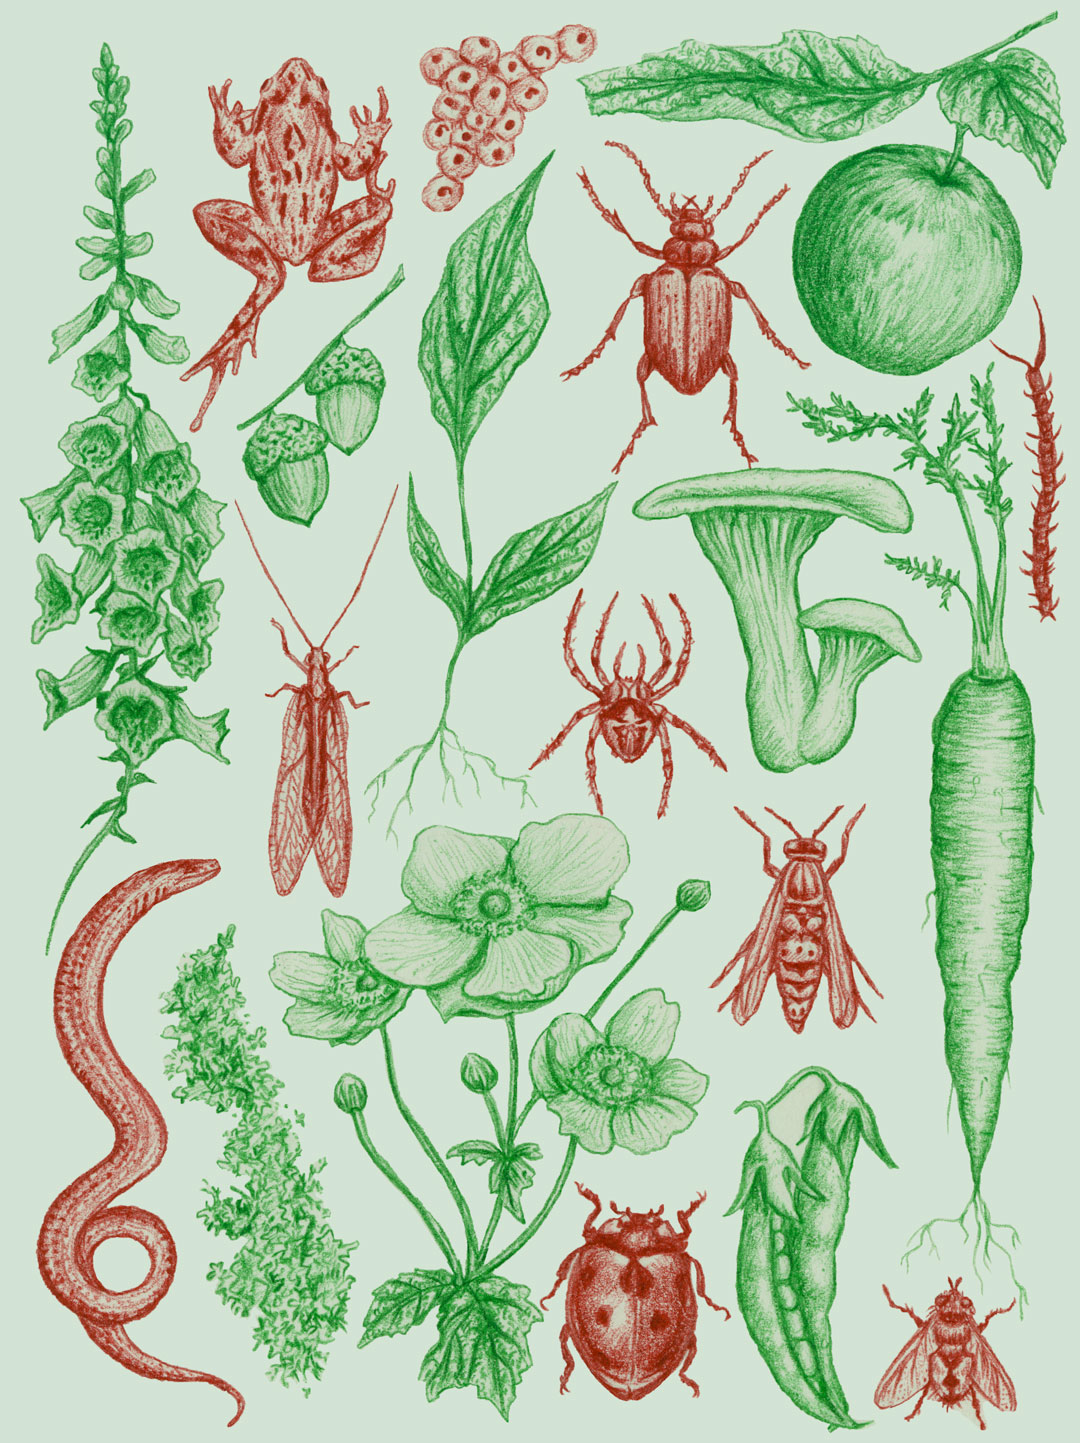 Coloured pencil drawings on light green background. Depicts flowers, fruits, vegetables fungi and lichen (green) and garden predators including a spider, frog, wasp, beetle, lacewing, slow worm and ladybird (red).